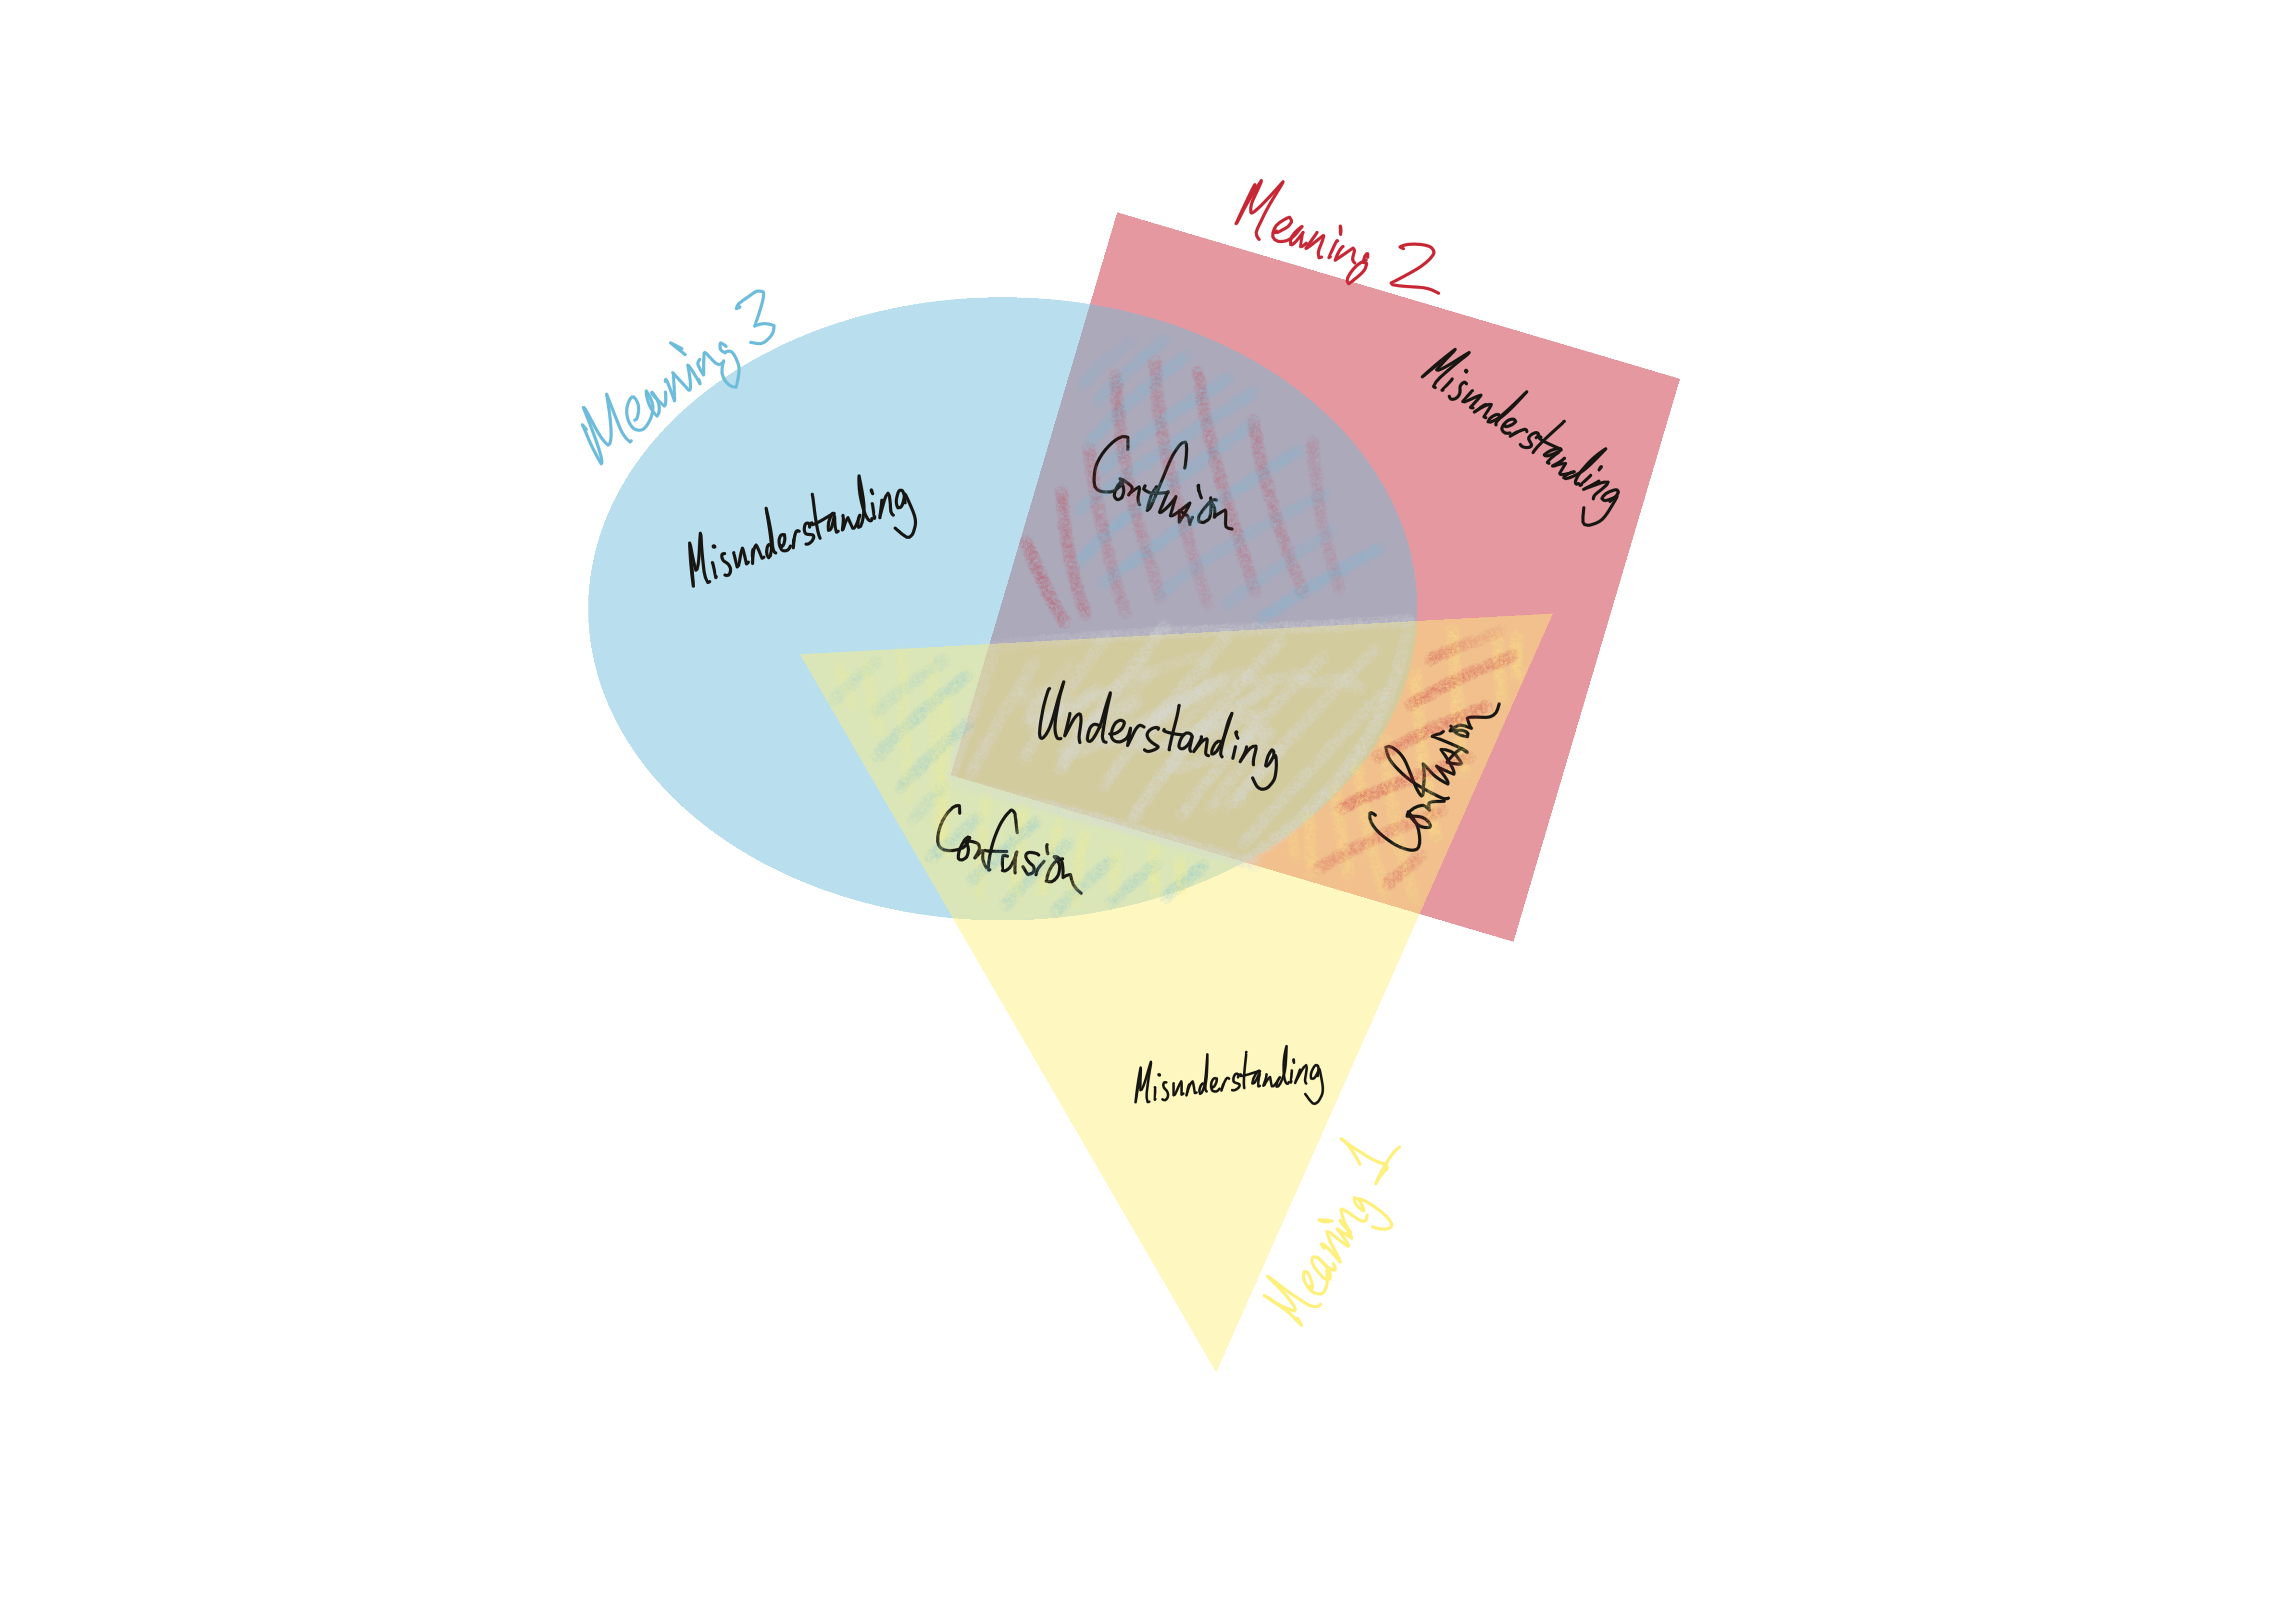 Buzzword meaning space. The three colored shapes are three different meanings attached to the same buzzword.